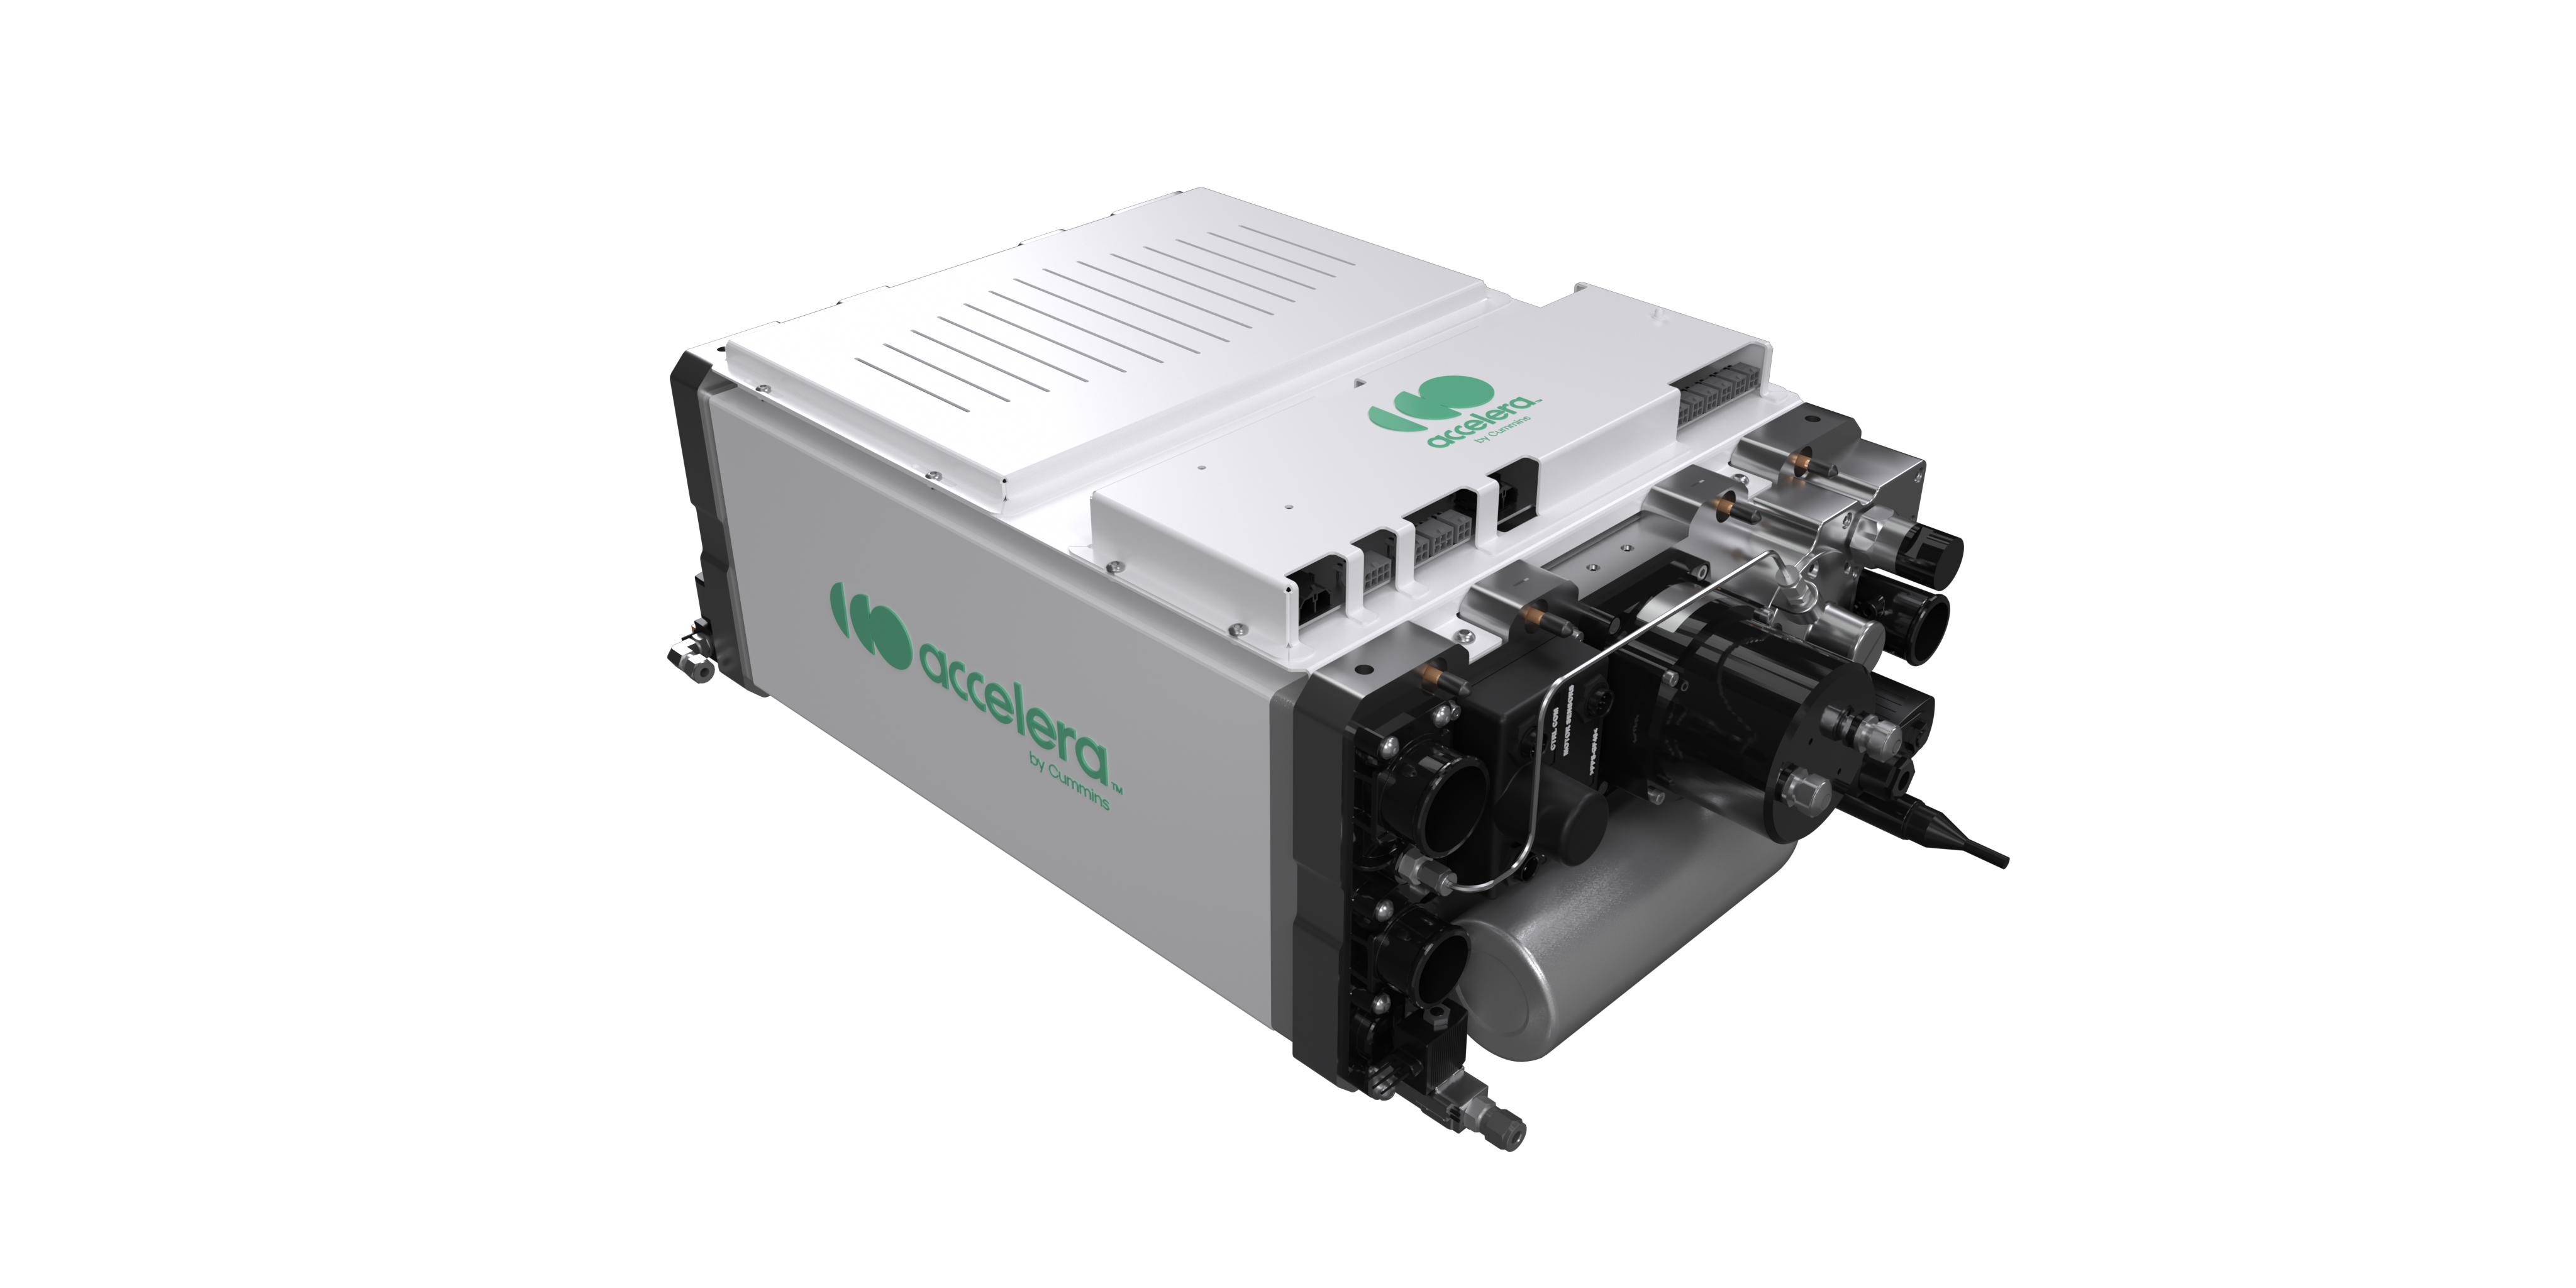 Product rendering of the Accelera HD30 fuel cell